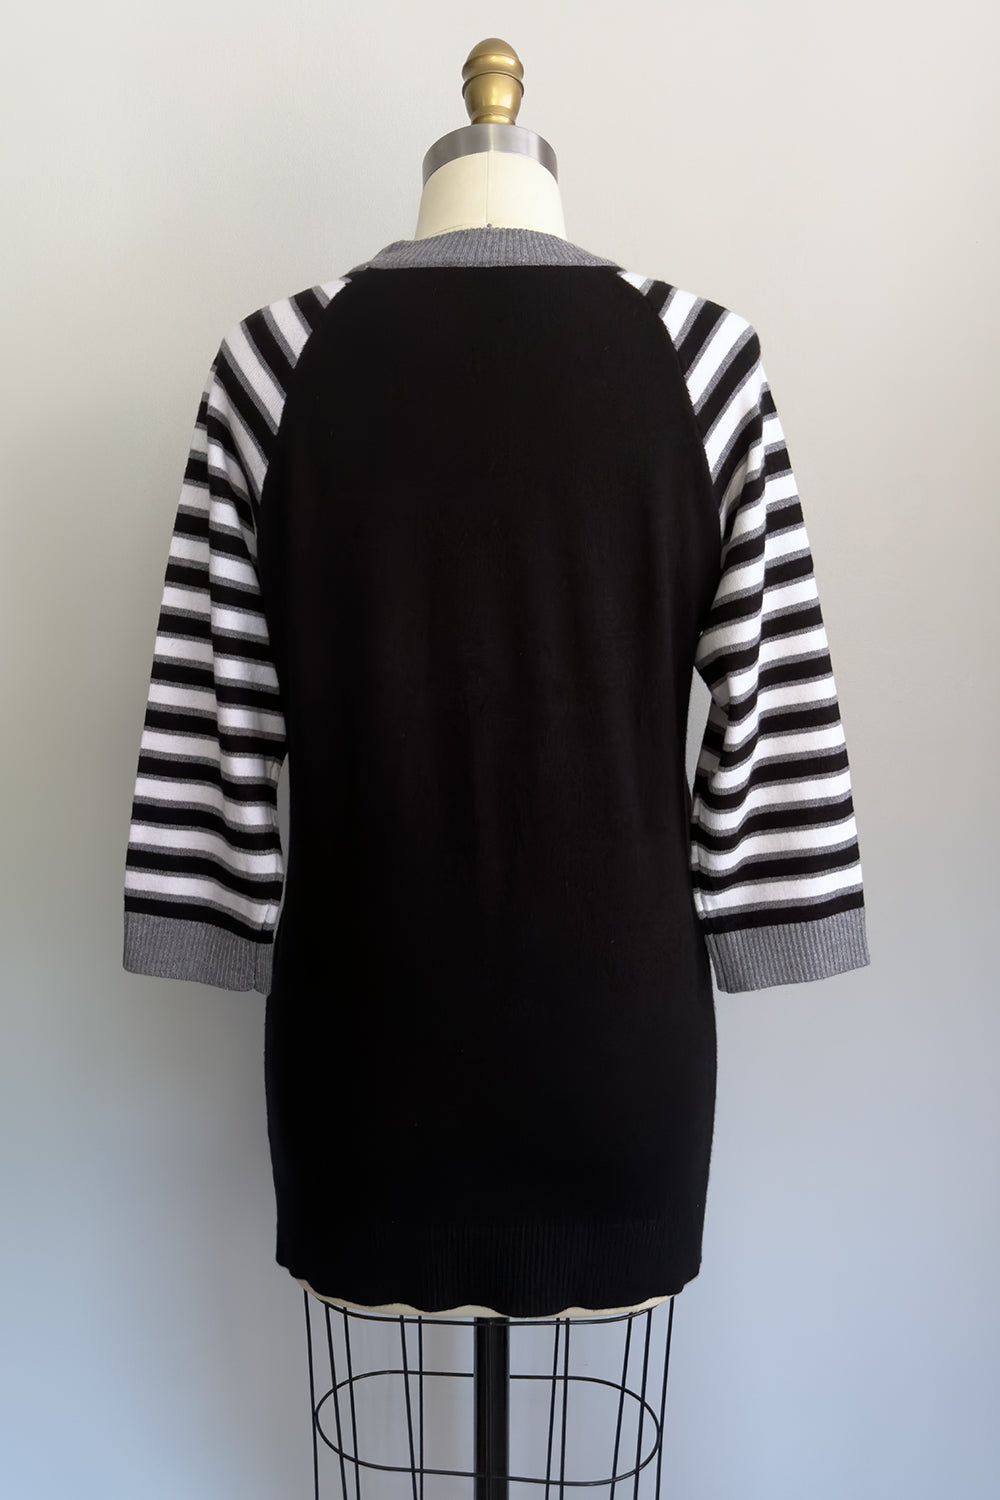 WMH Spiderweb 13 Sweater Black with Stripe Sleeves